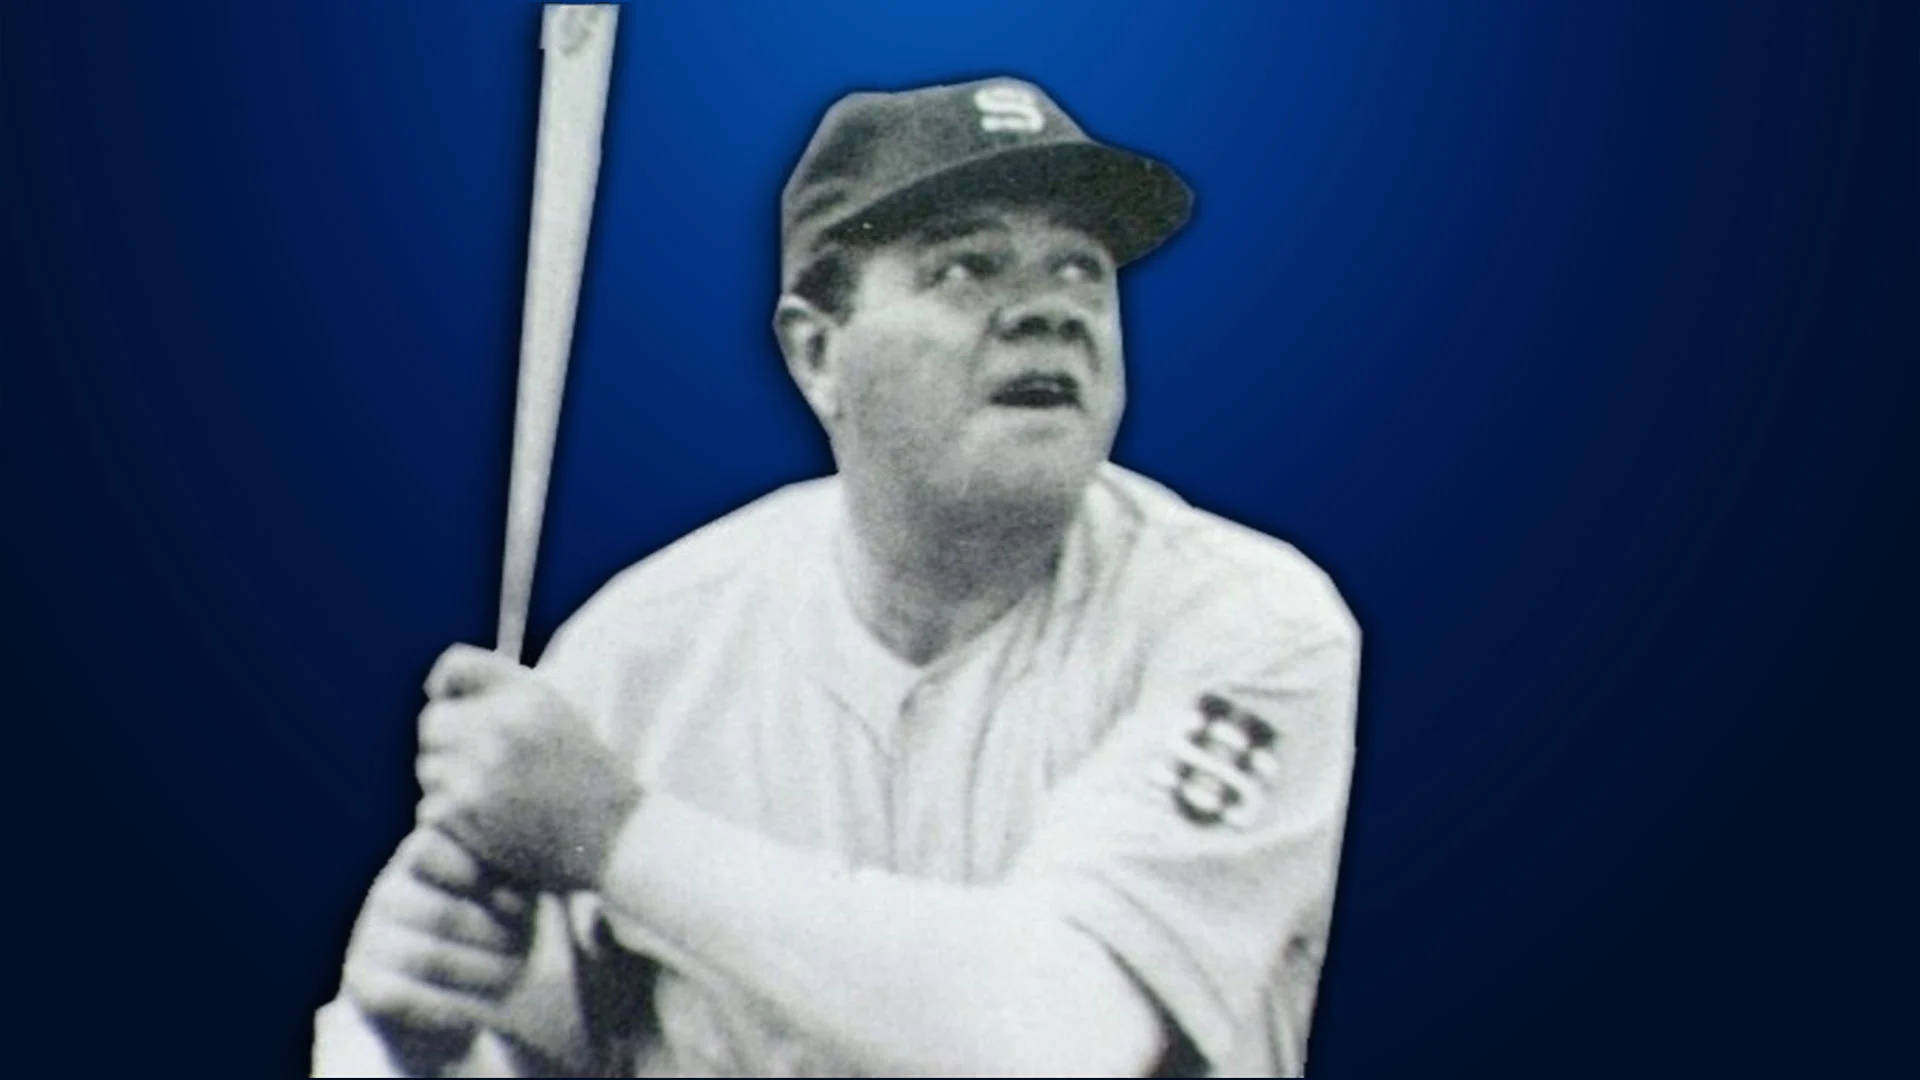 Babe Ruth In Blue Background